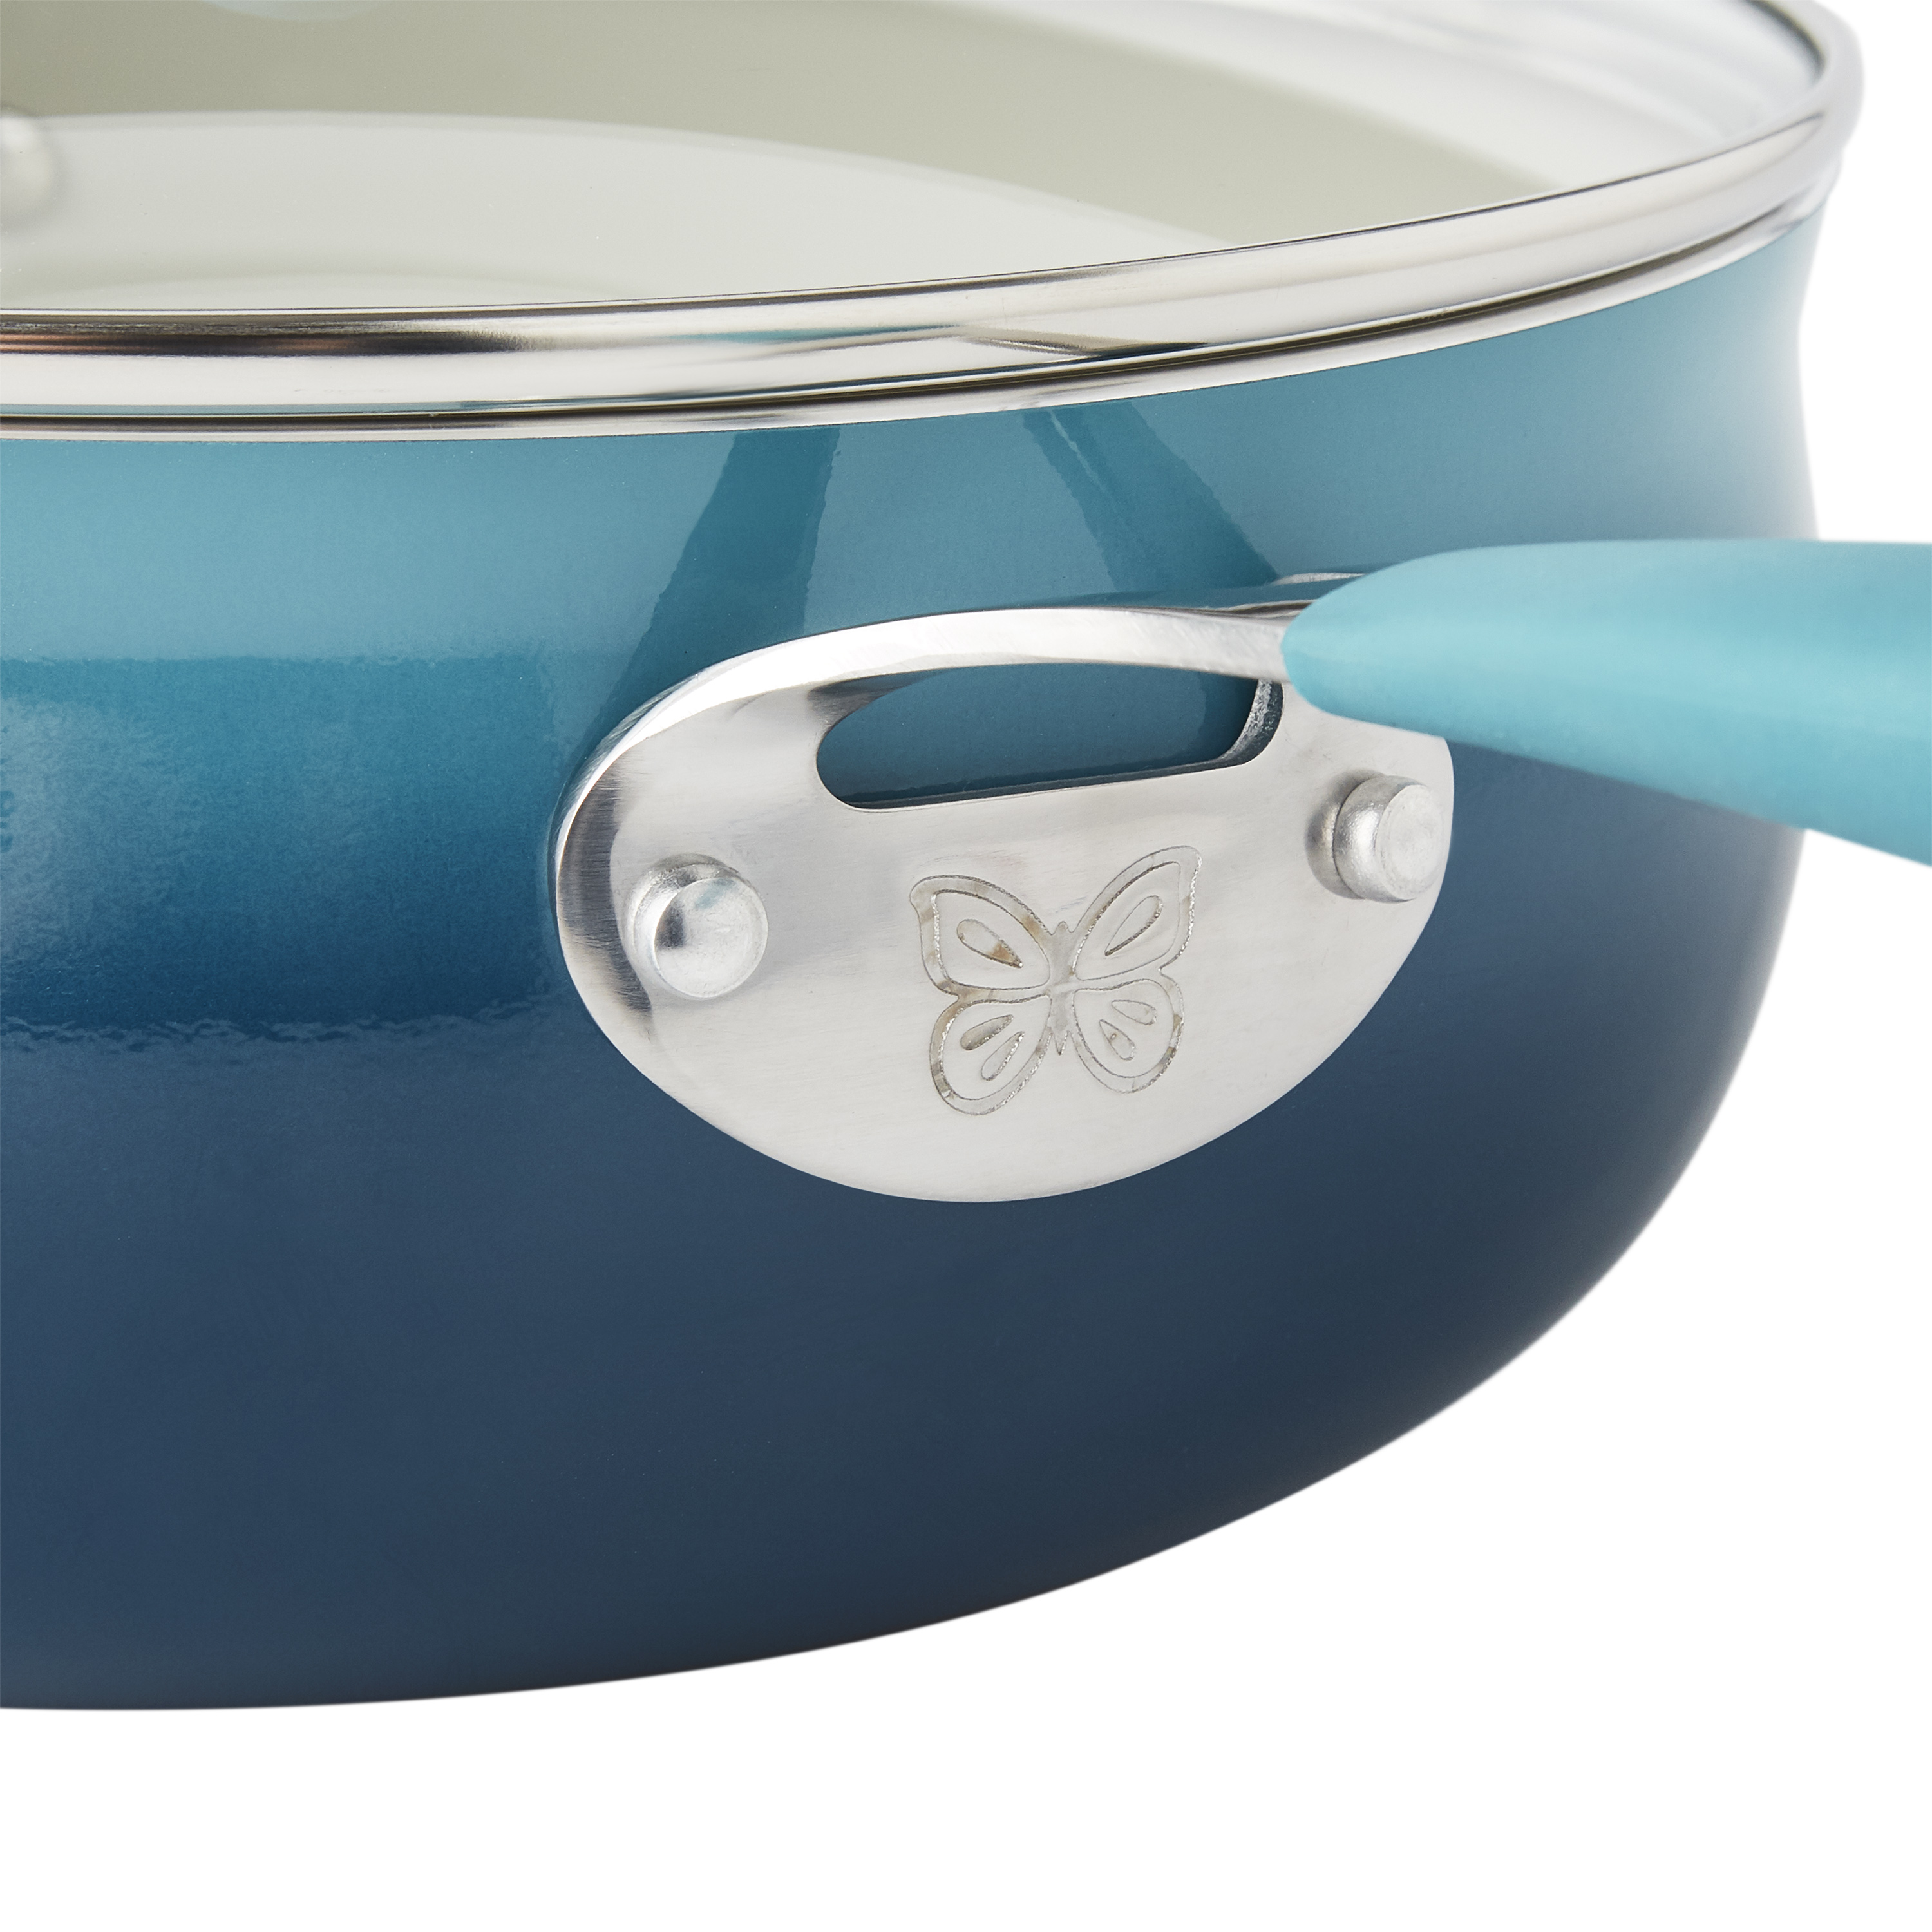 The Pioneer Woman Ombre 4.5-Quart Ceramic Jumbo Cooker, Teal - image 4 of 4